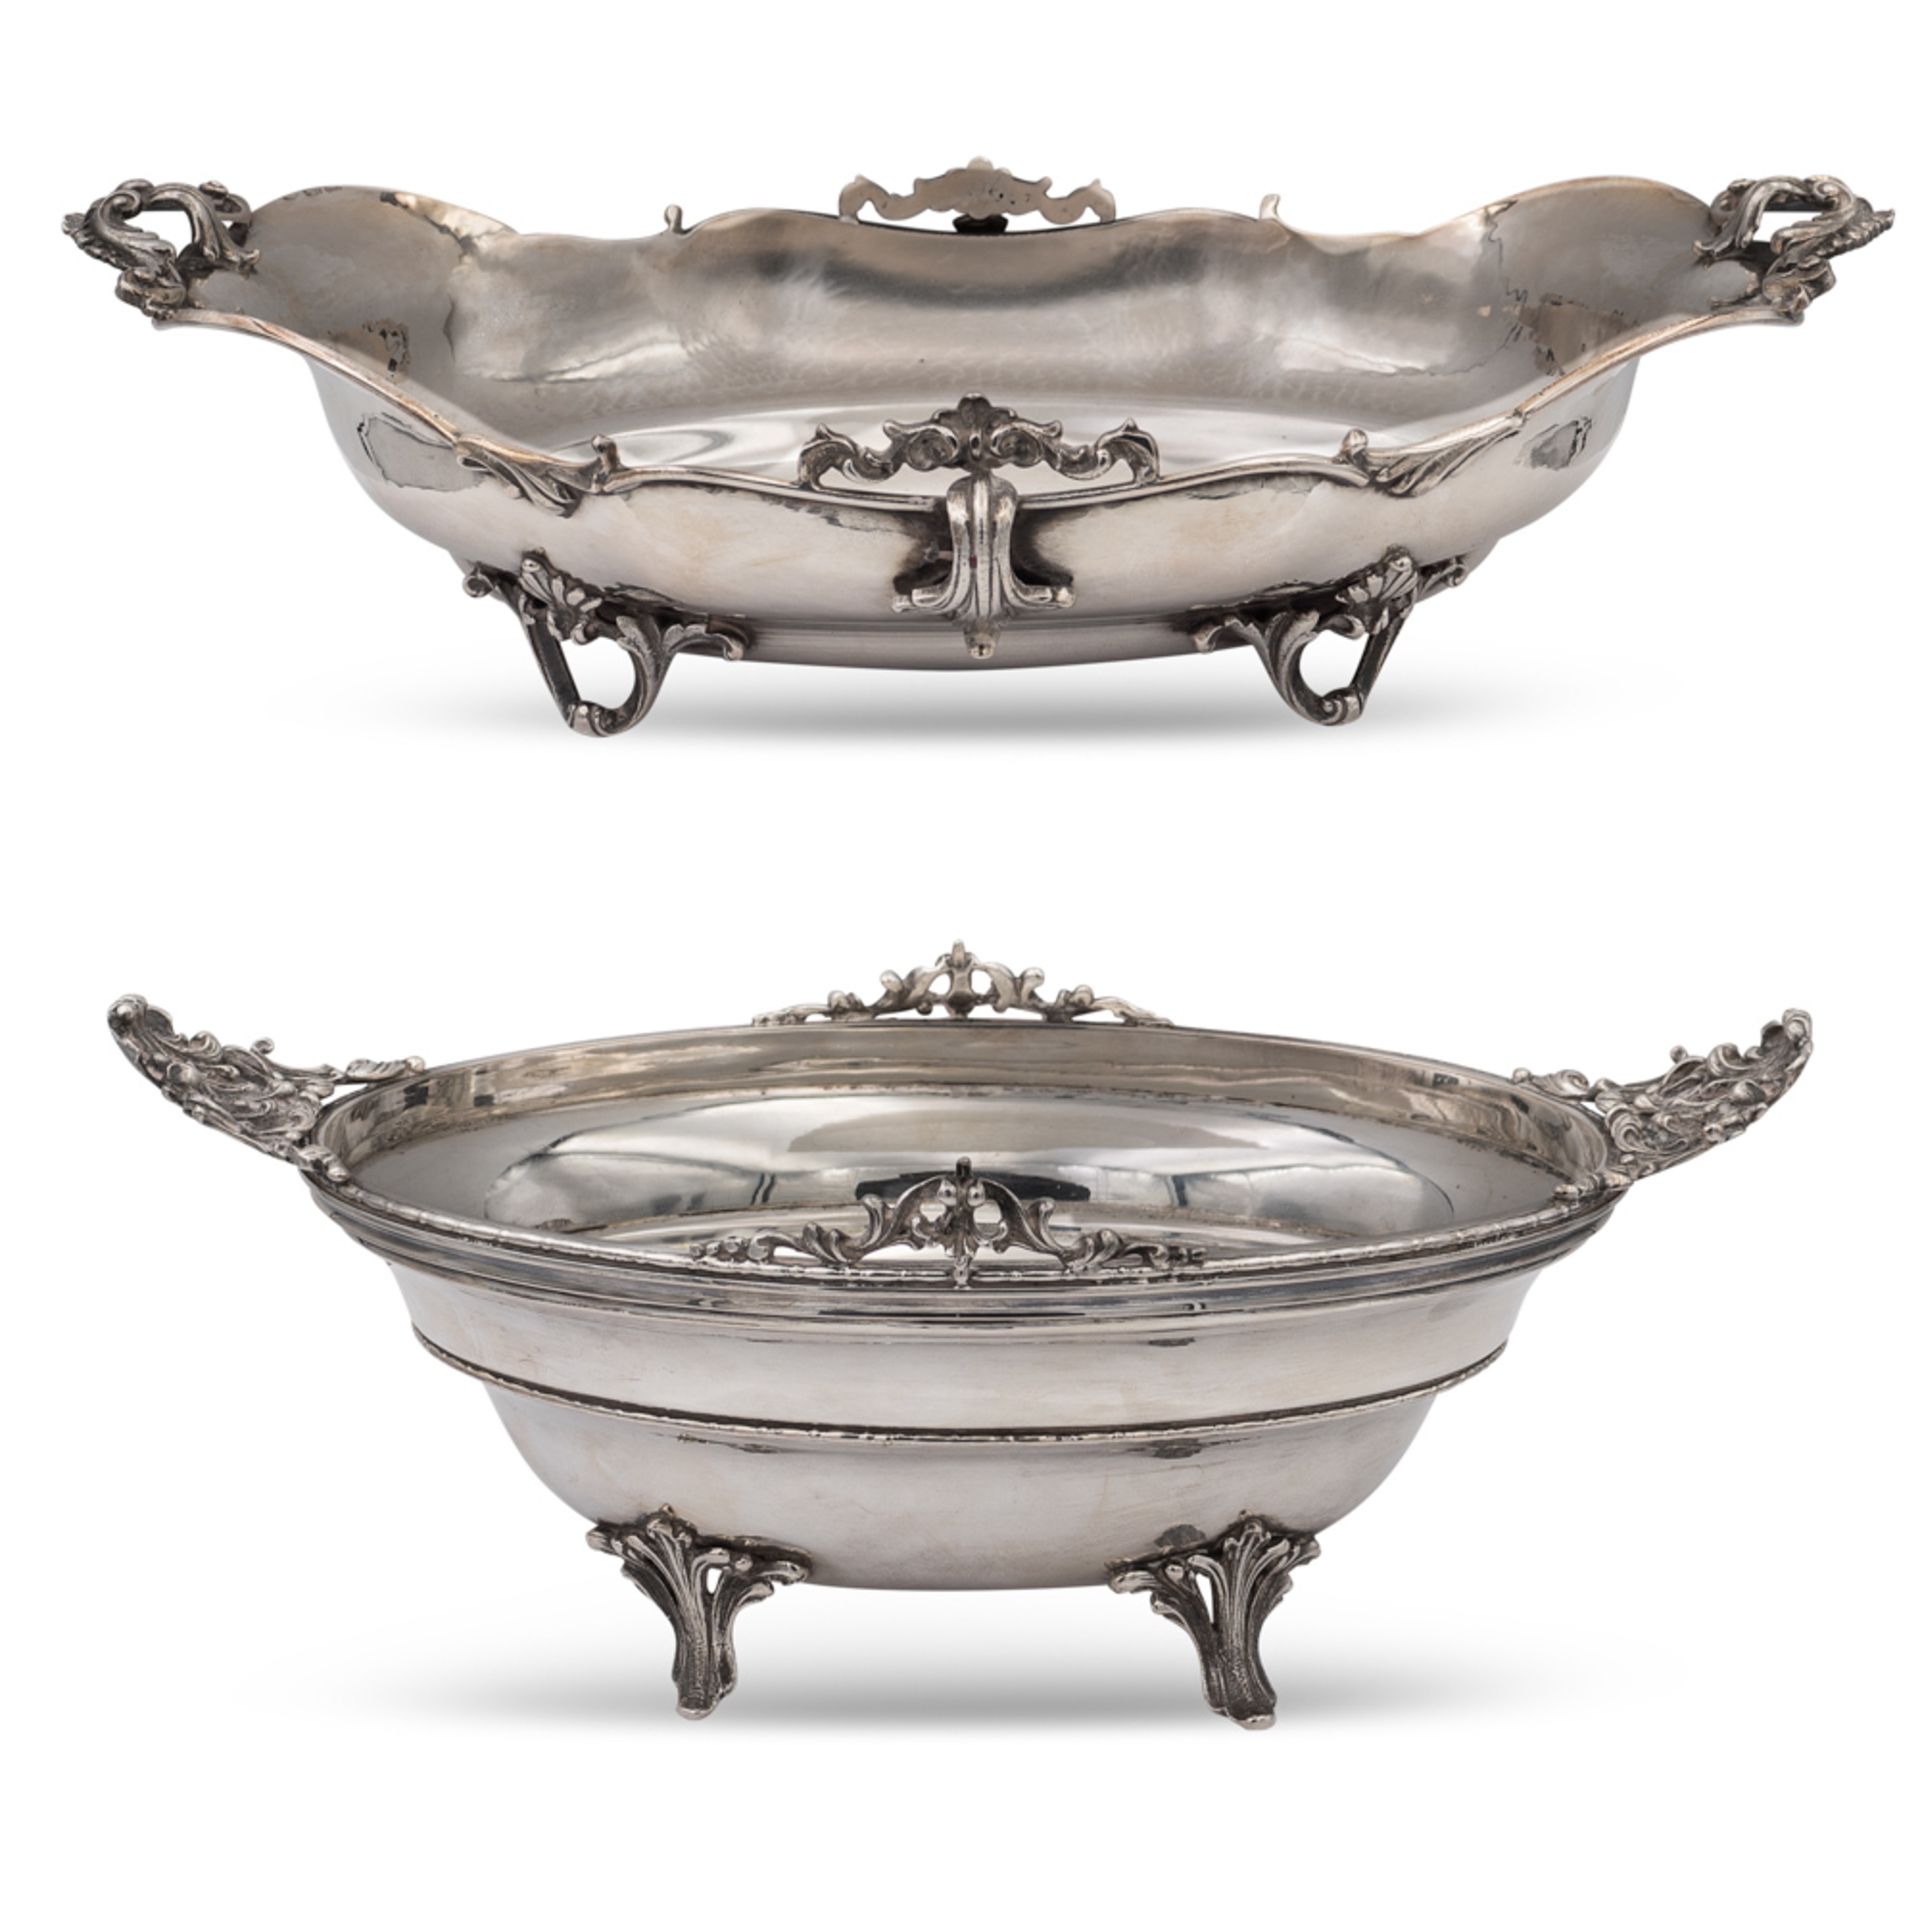 Two silver centerpieces Italy, 20th century 8x32xx19 - 9,5x24,5x15 cm. different shapes and